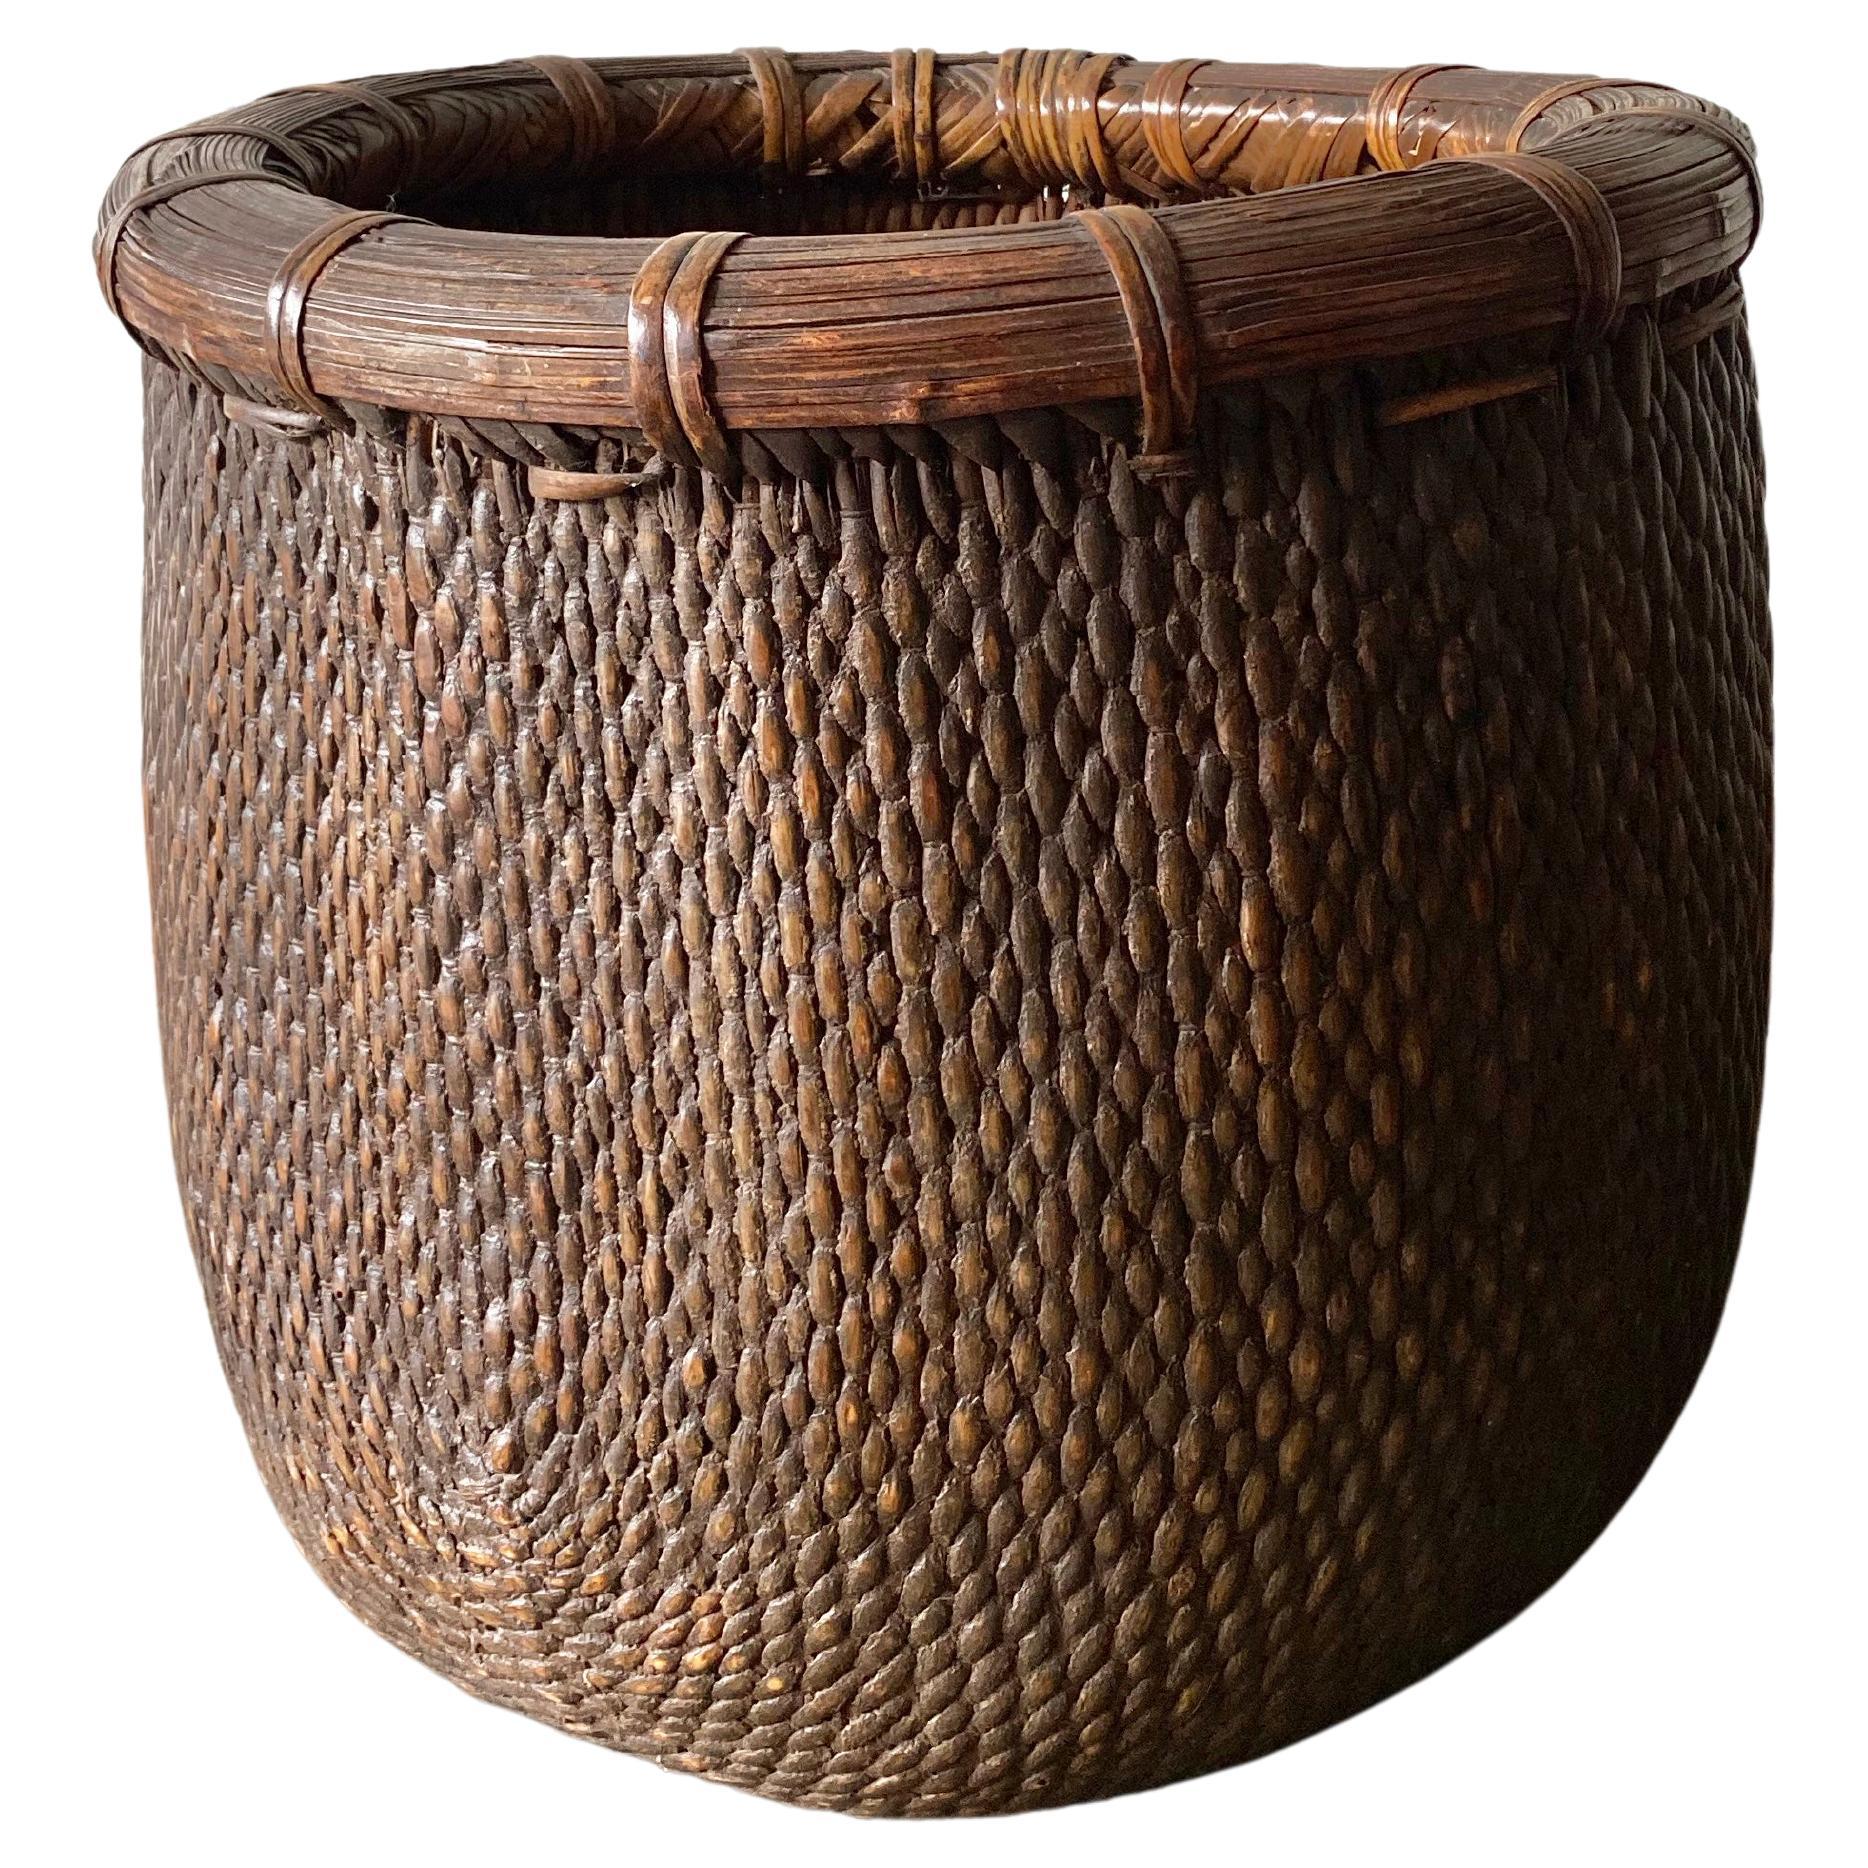 Chinese Willow Reed Grain Basket, Mid-20th Century